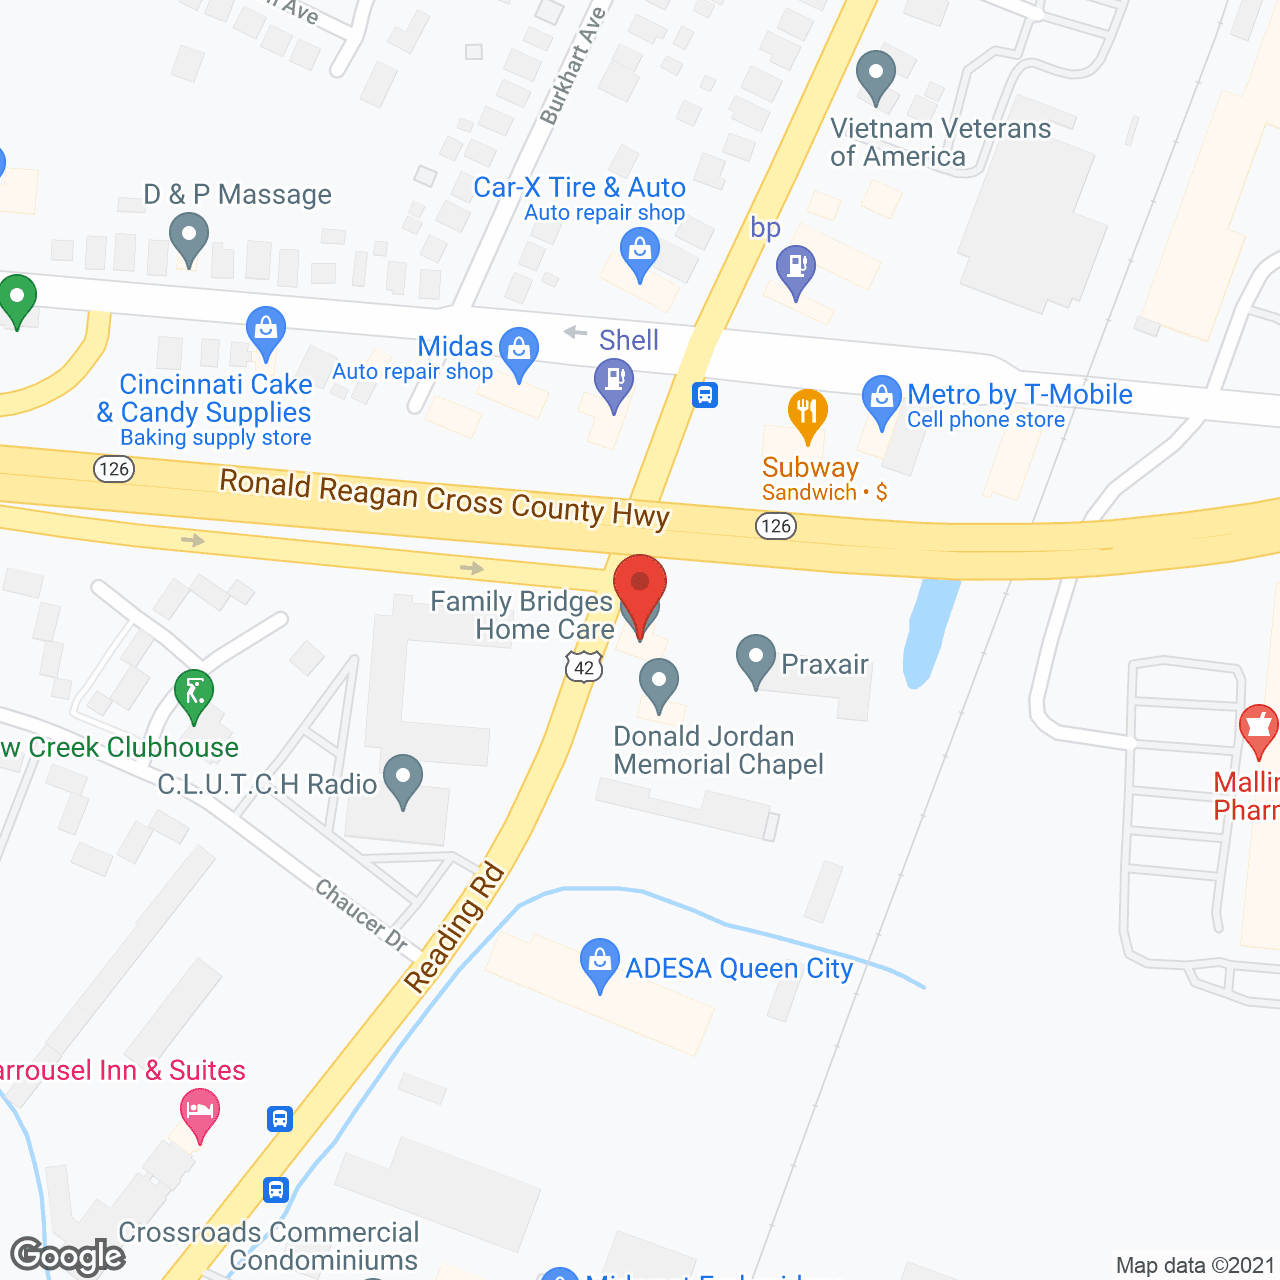 Family Bridges Home Care in google map